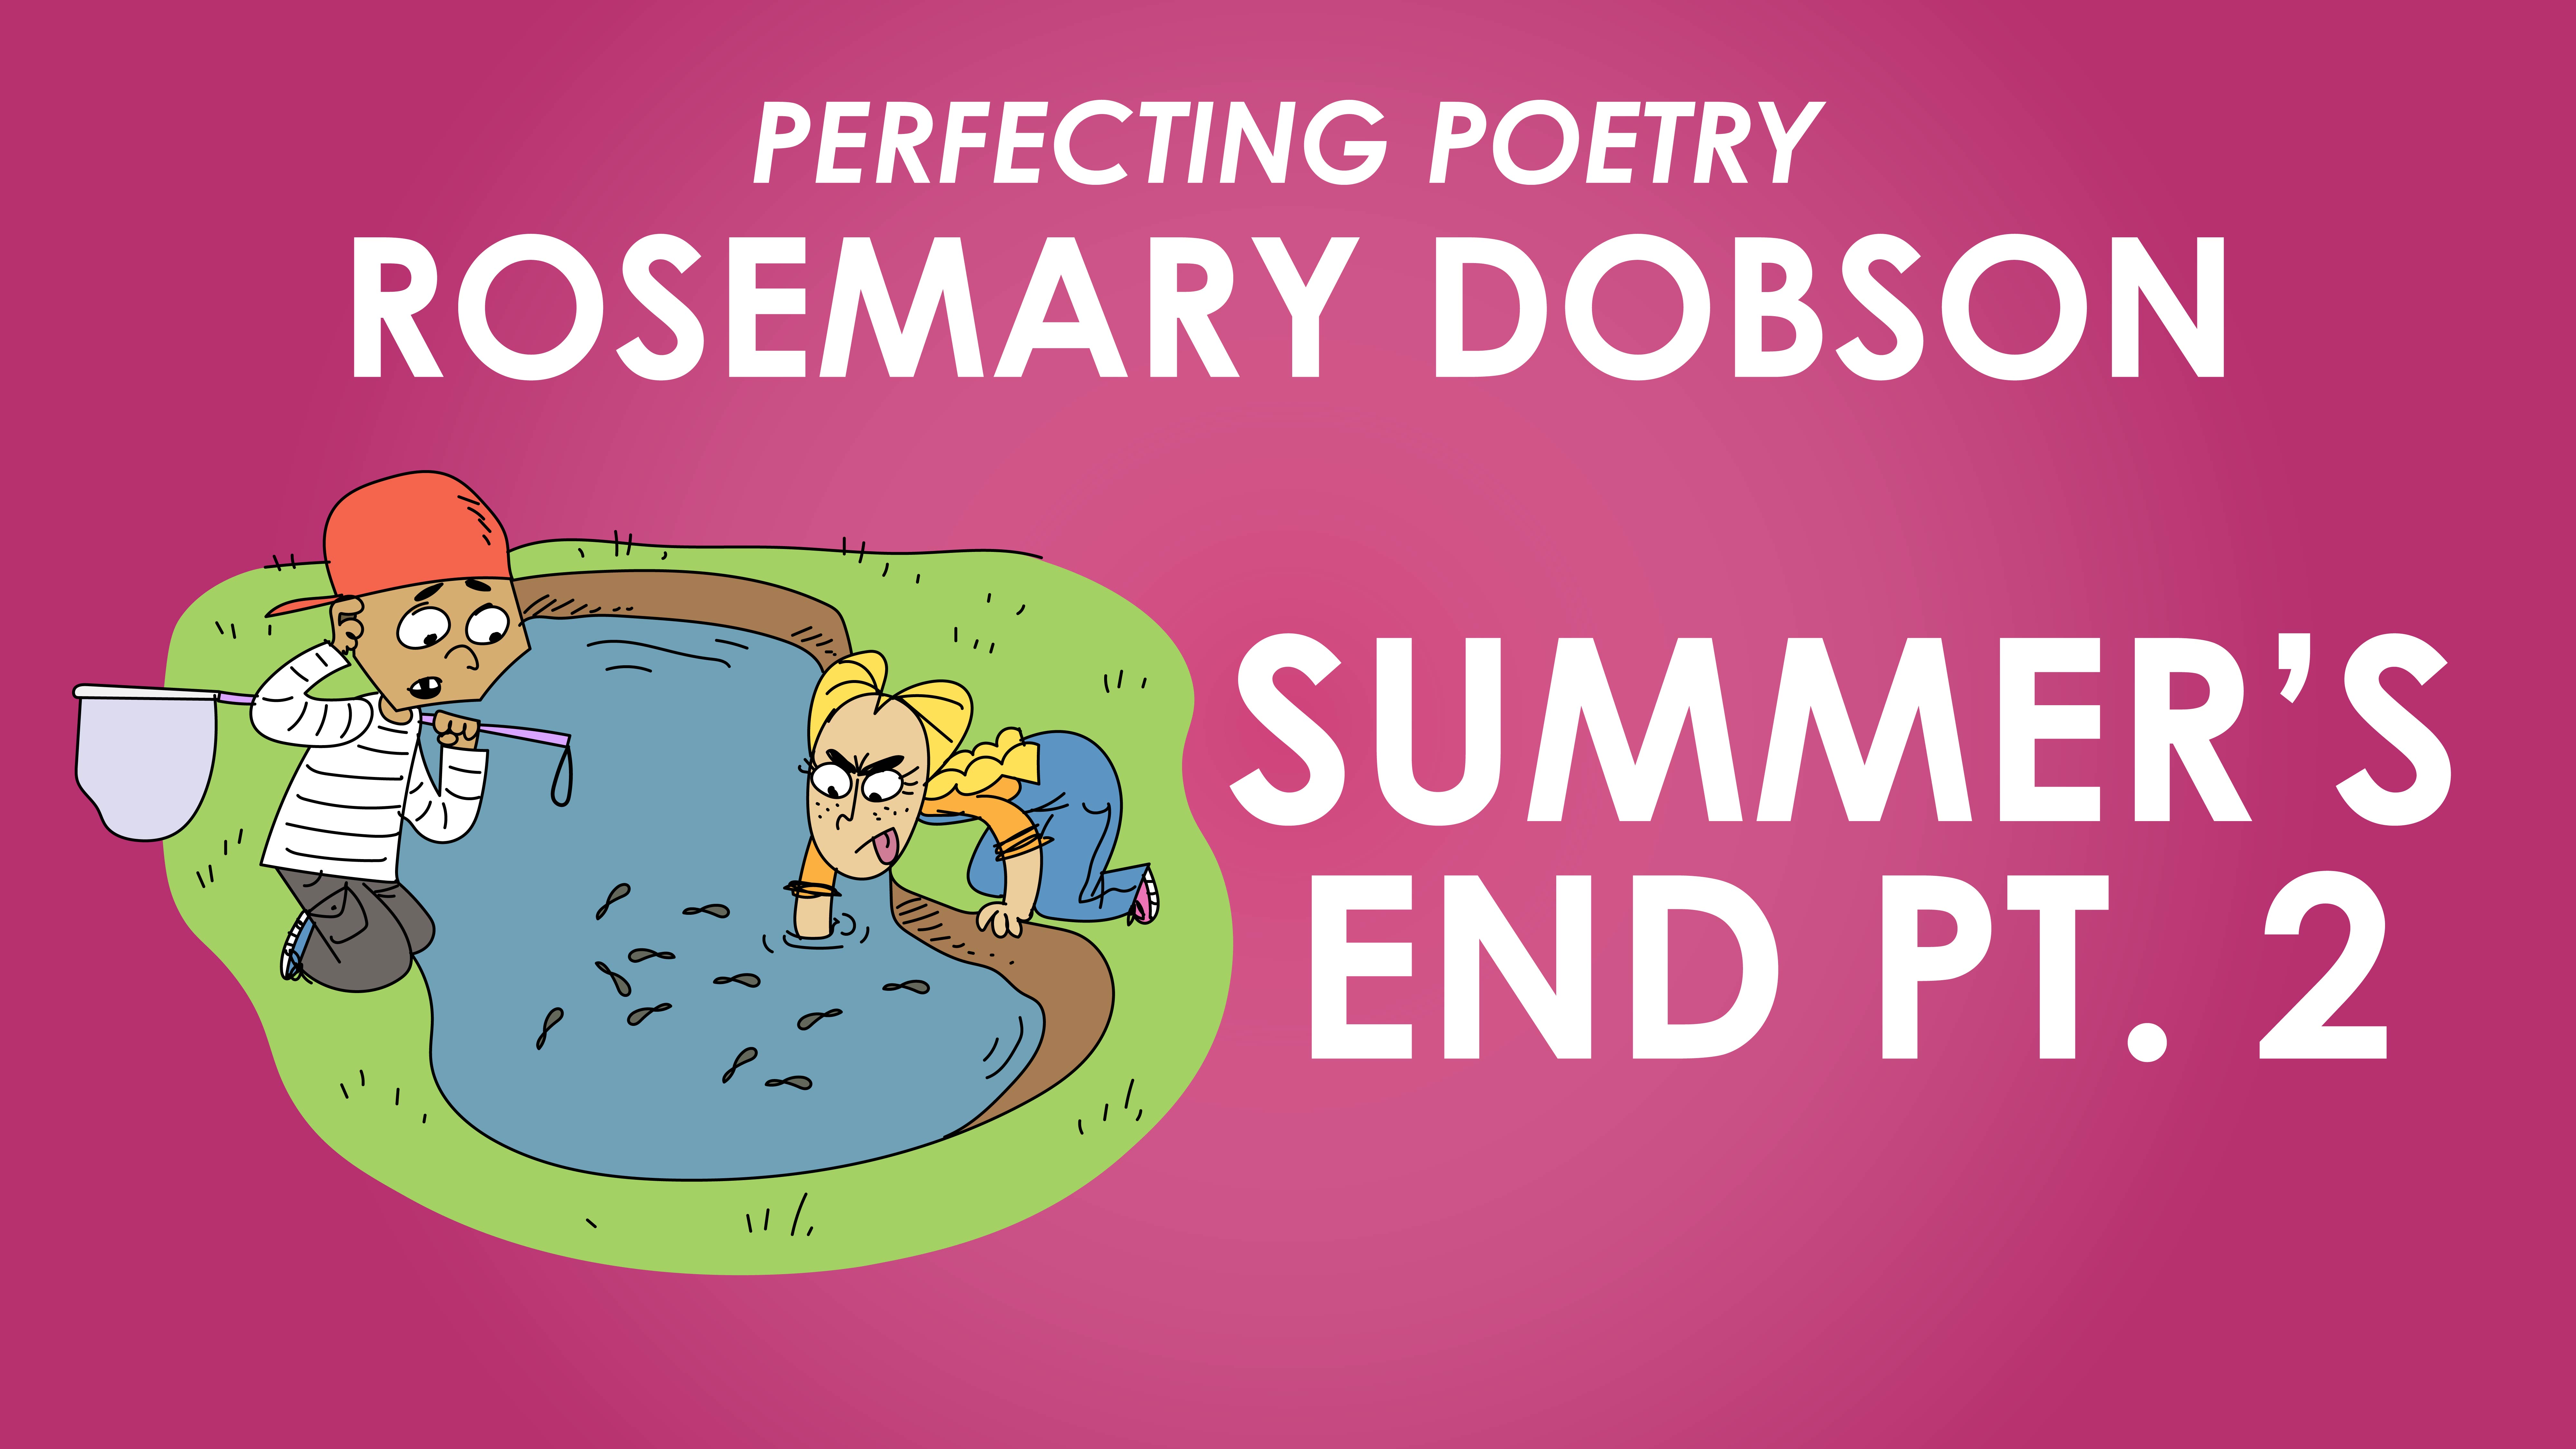 Summer's End - 2. Picnic - Rosemary Dobson - Perfecting Poetry